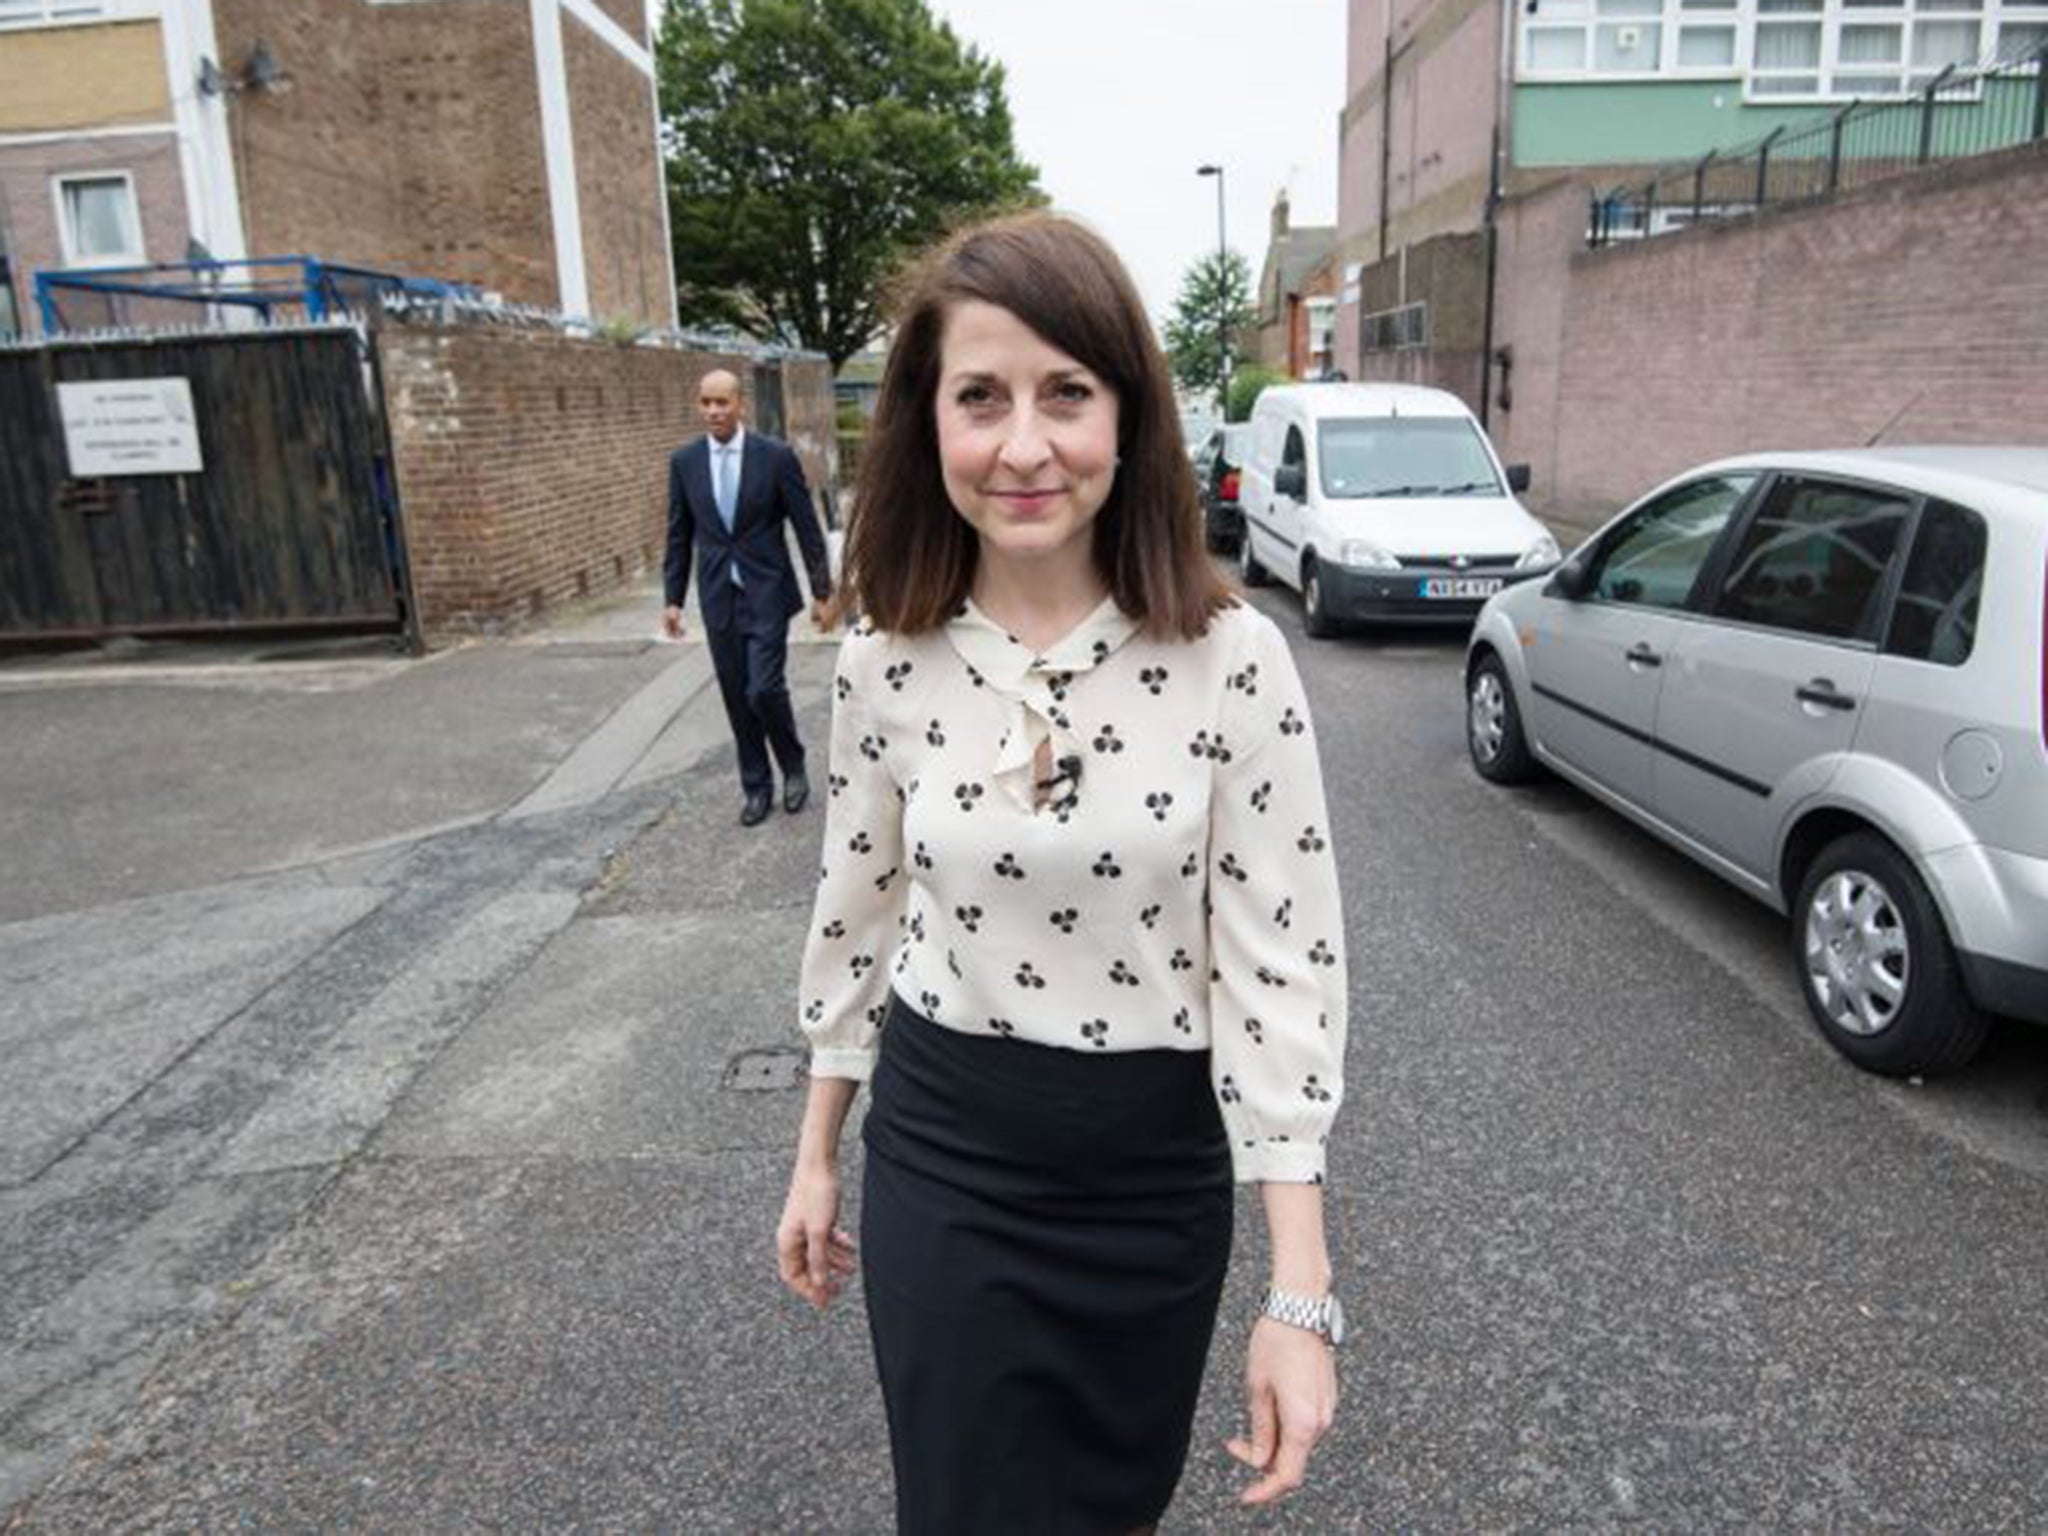 Liz Kendall said the Labour party had too often turned to regulation, restrictions and bans as a way of resolving the country’s problems